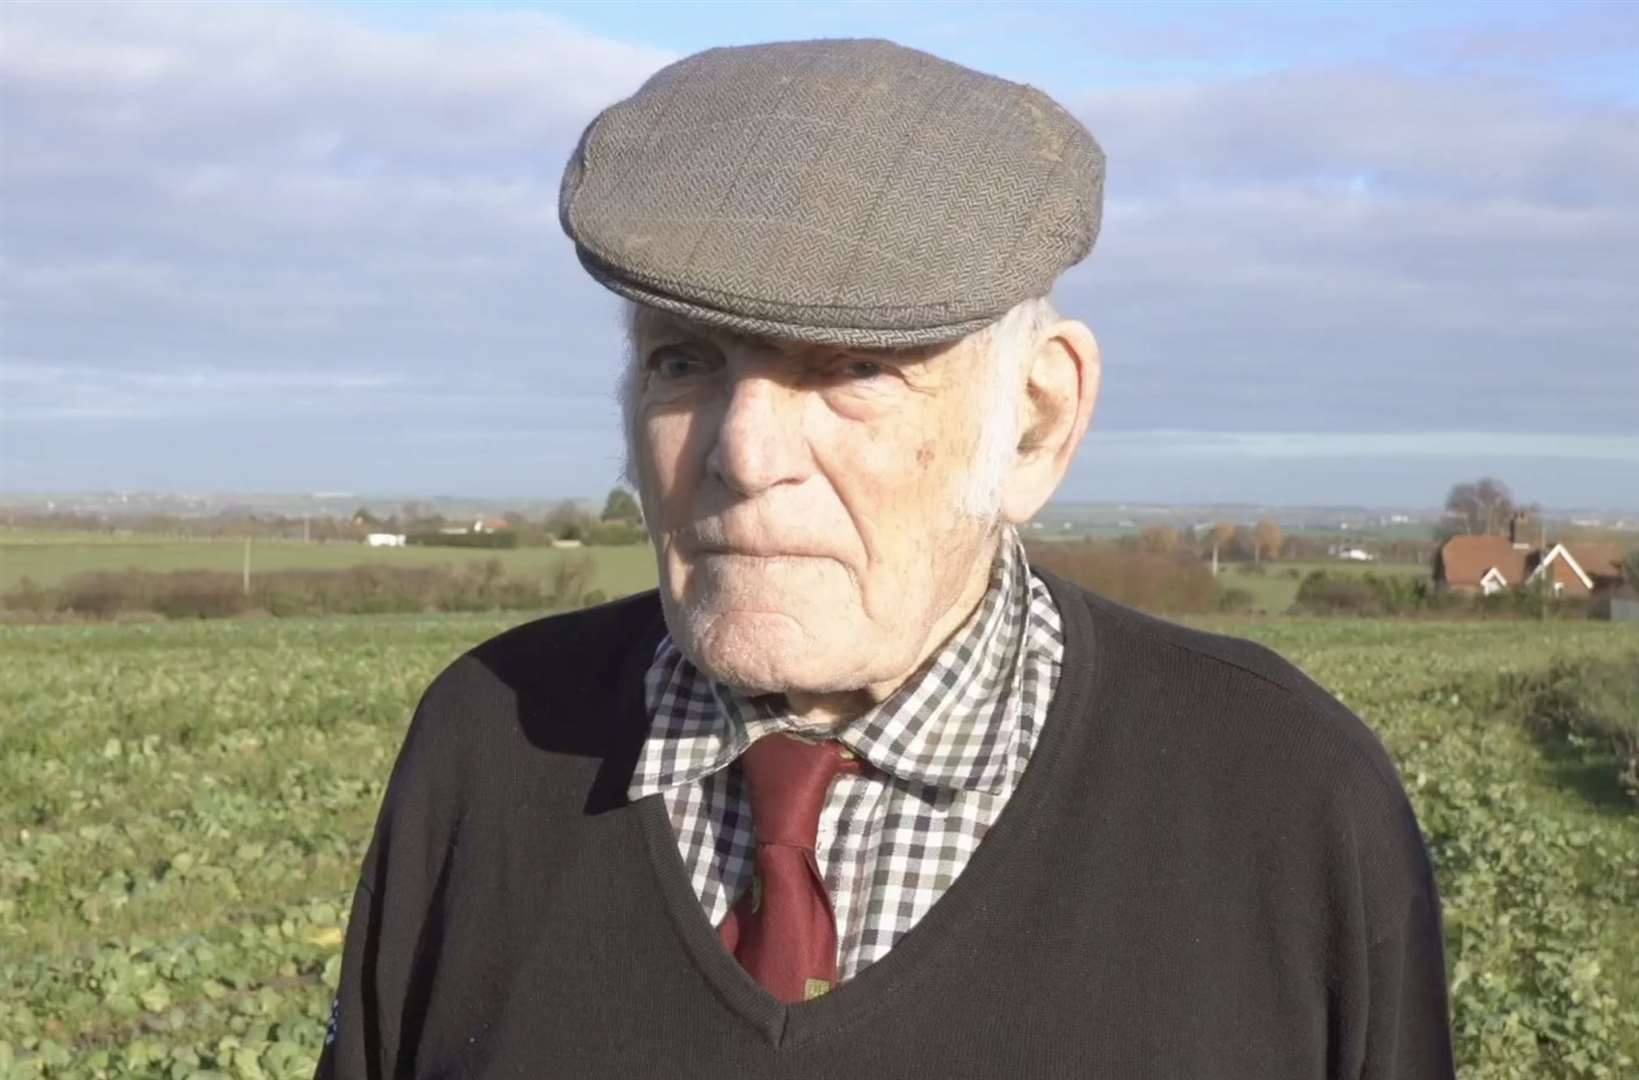 Dickie Ovenden, who runs a farm near Sandwich, says "you'd have to be half-mad to do this"